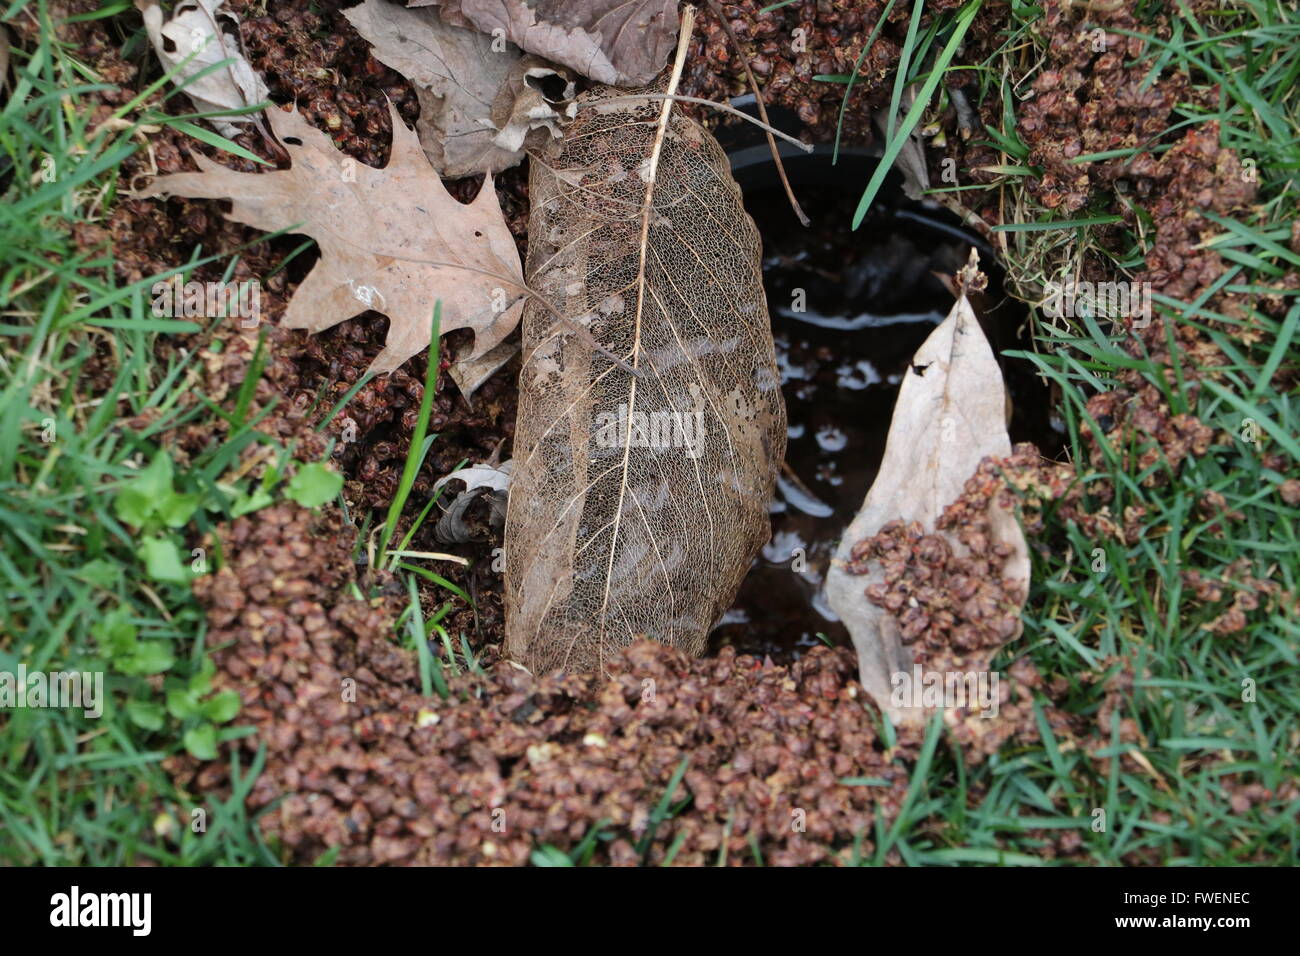 Dead leaves on top a small unexplained hole in the ground. Stock Photo